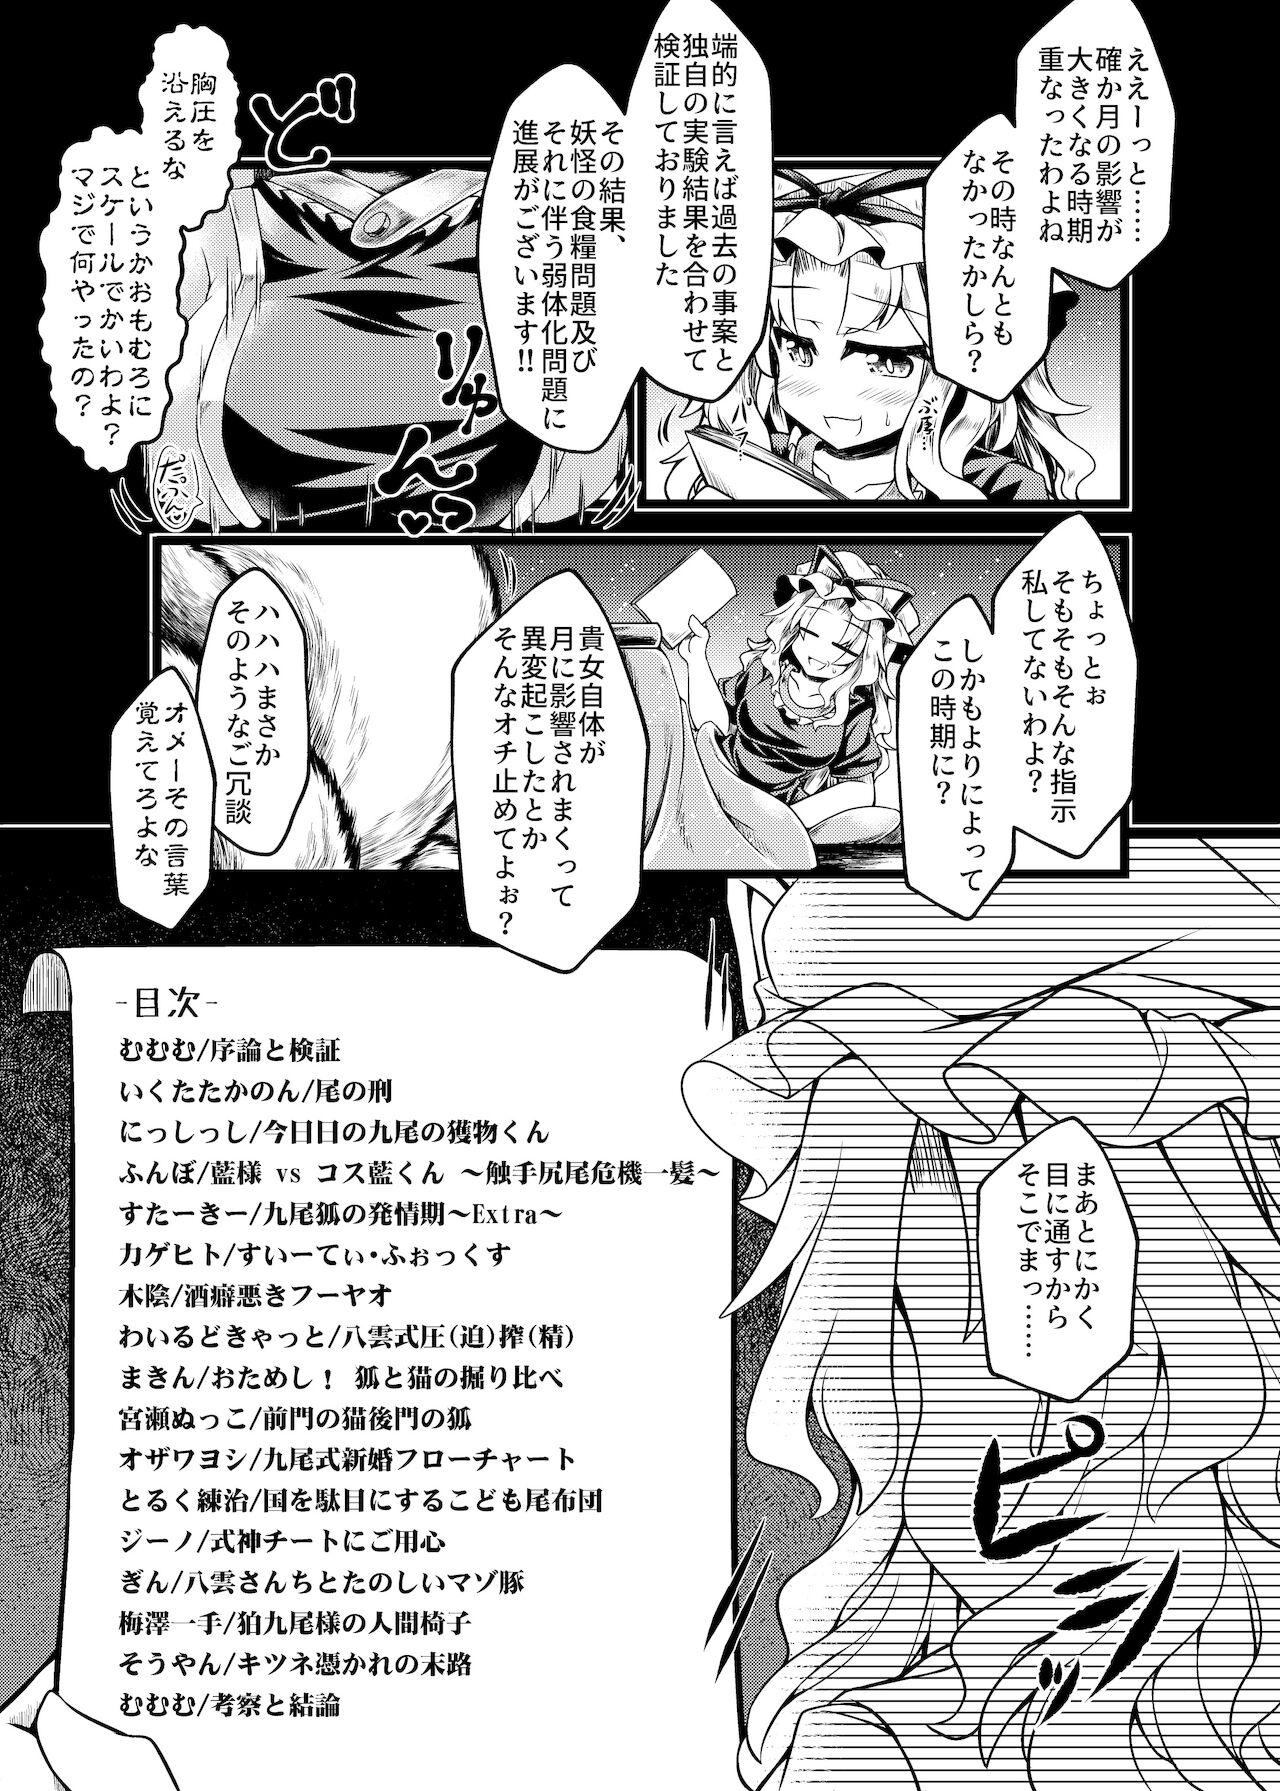 Real Orgasms 嫐九尾の搾精報告 - Touhou project Soapy Massage - Page 5